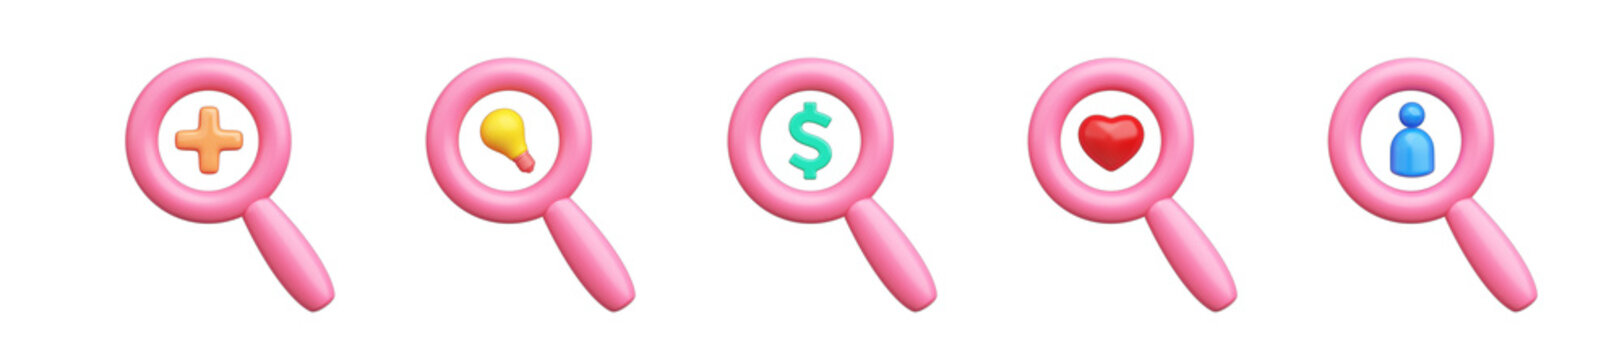 3d object pink magnifying glass cute kid style. Concept information search, dating, find people, financial business, imagination and creative. PNG file. 3D Illustration.